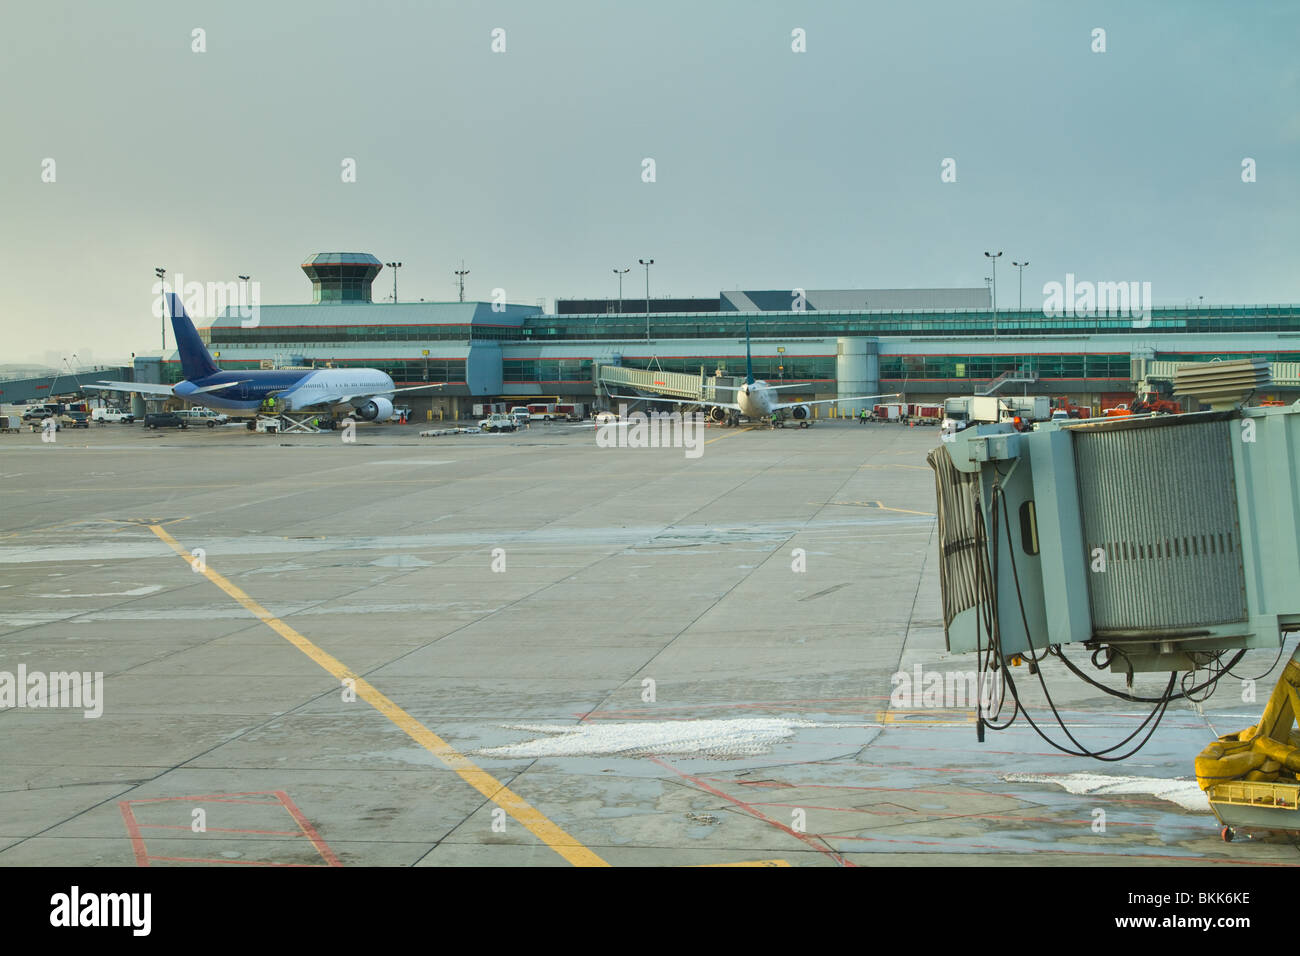 The tarmac at an airport, showing the rear of a passenger plane in the background with an empty gate in the foreground. Stock Photo